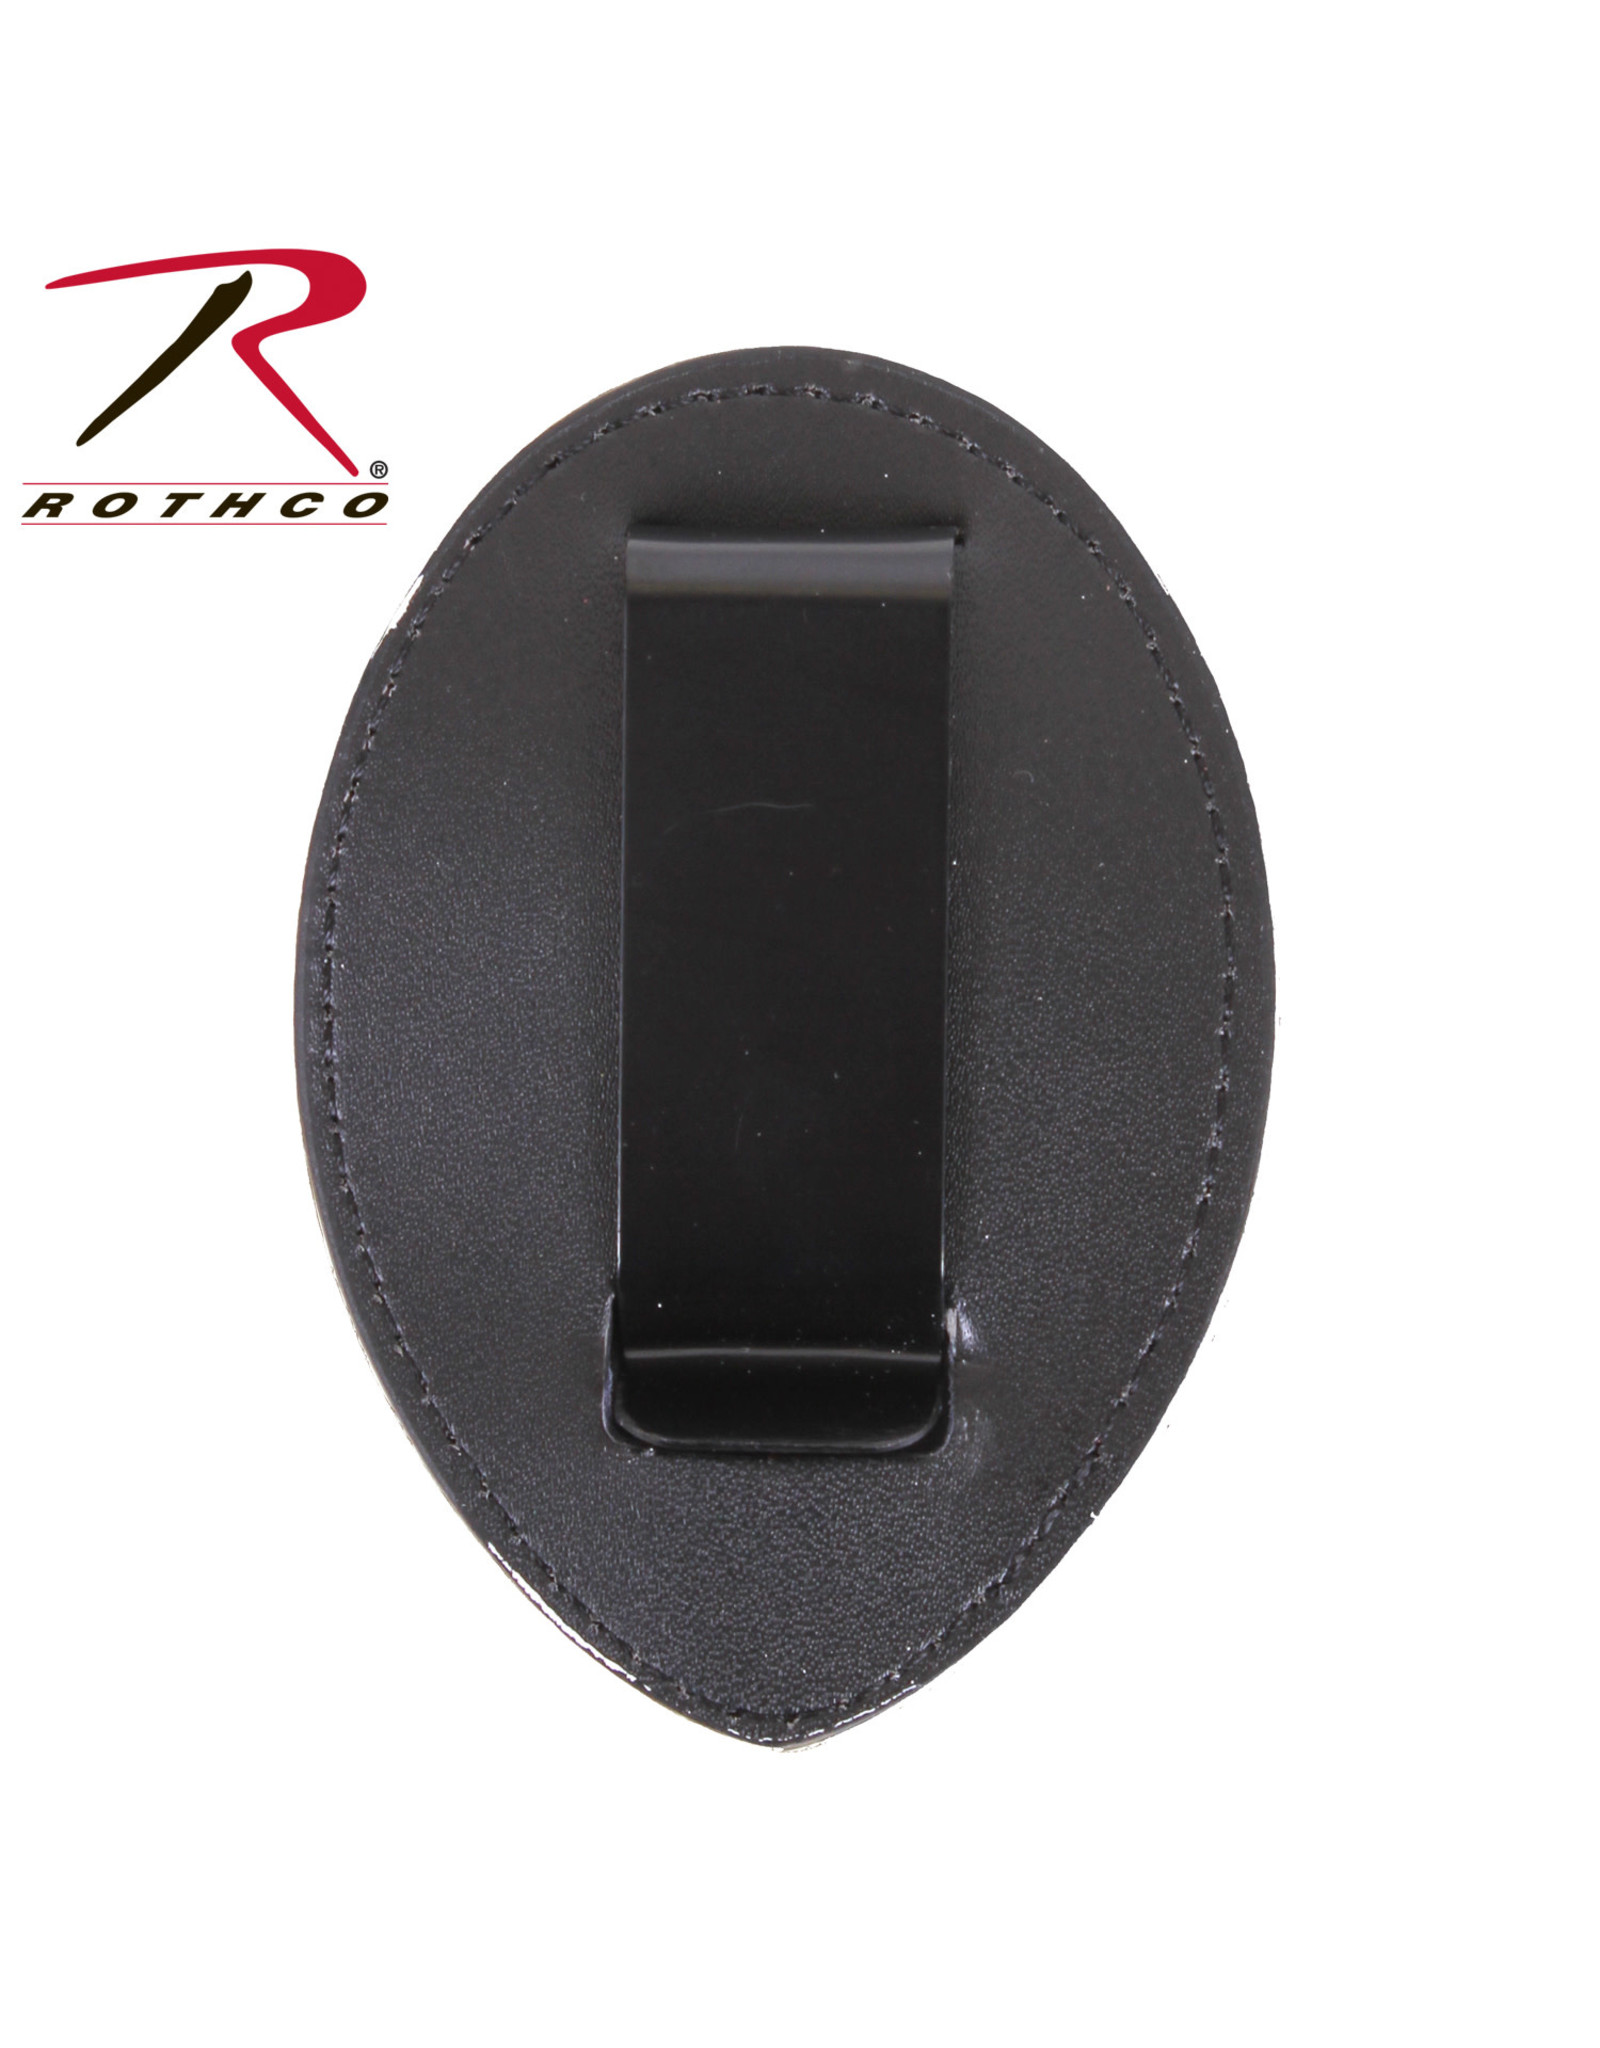 Rothco Badge Holder Clip-on